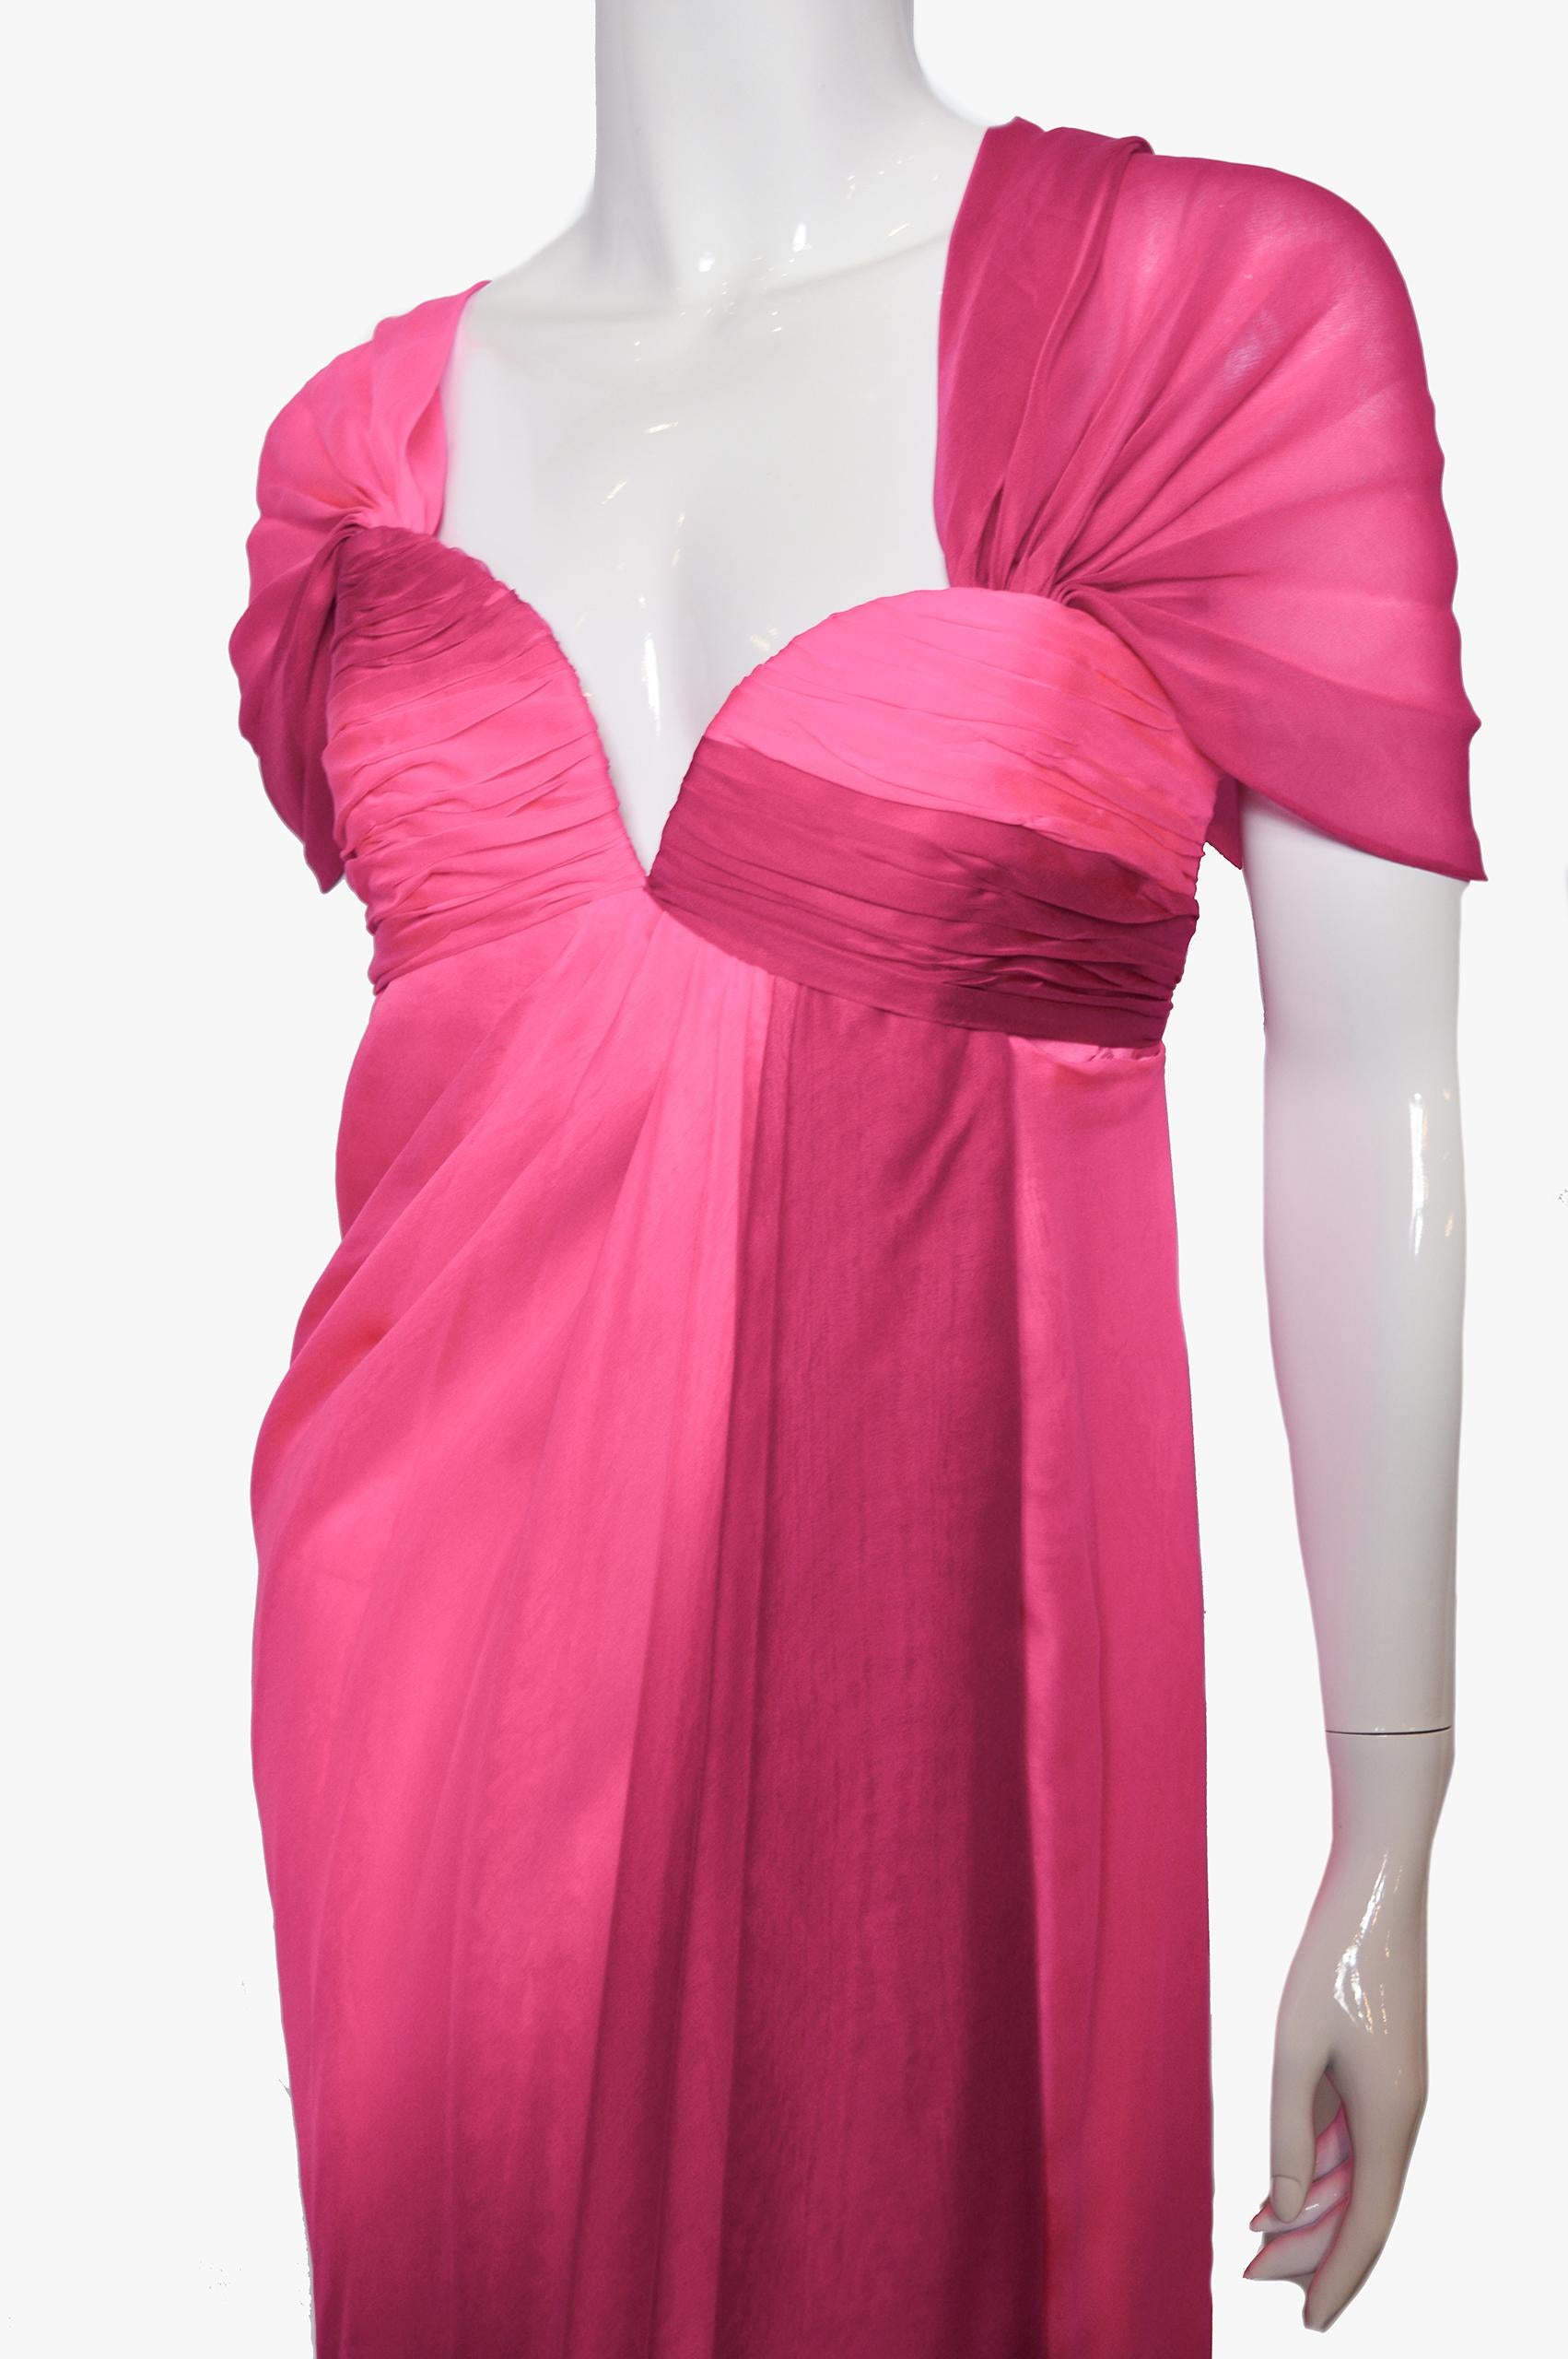 A stunning vintage silk evening dress by Odicini Couture 1980s.

The bodice of the dress has splints with a heart deep neckline, with side metal zip closure.
It has internal boning bodice closed with side hooks closure.
Material: Silk
Size: 42, US-